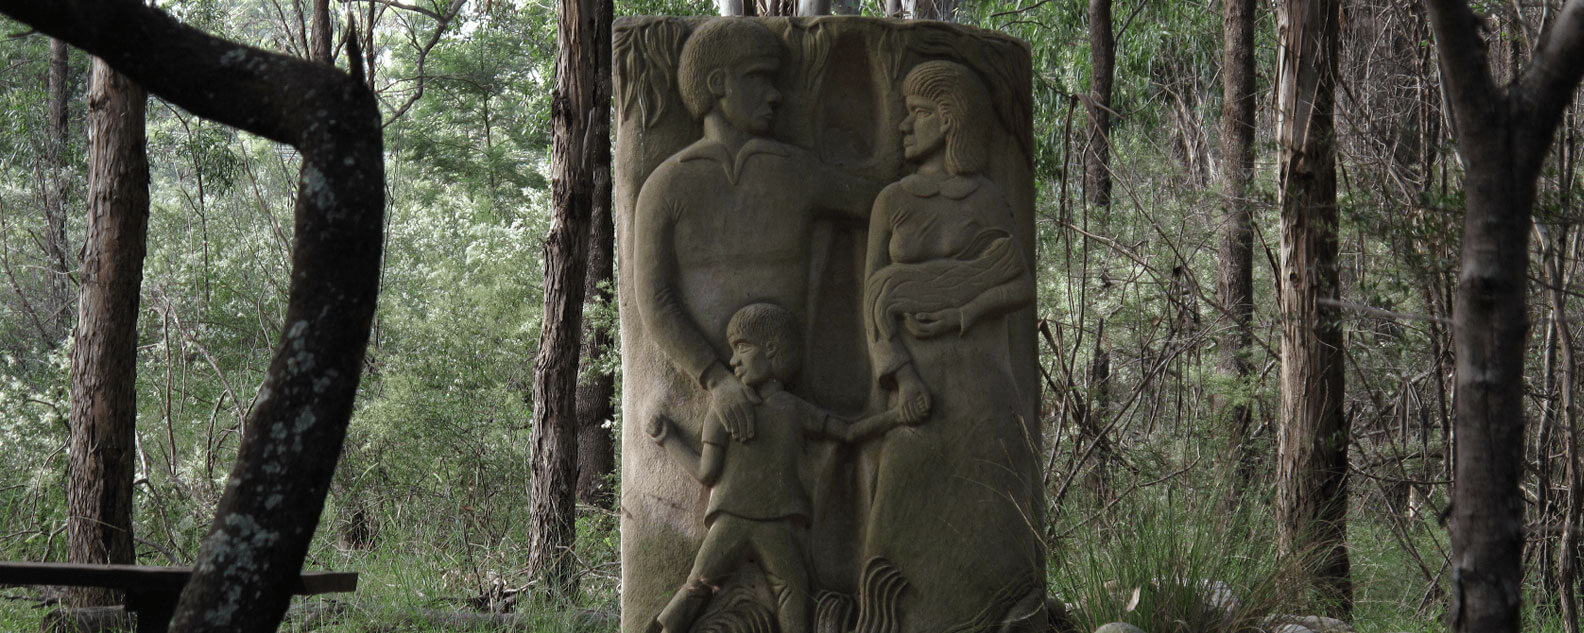 Stolen Generations Sandstone Memorial by Badger Bates in the Cumberland Plain Woodland 